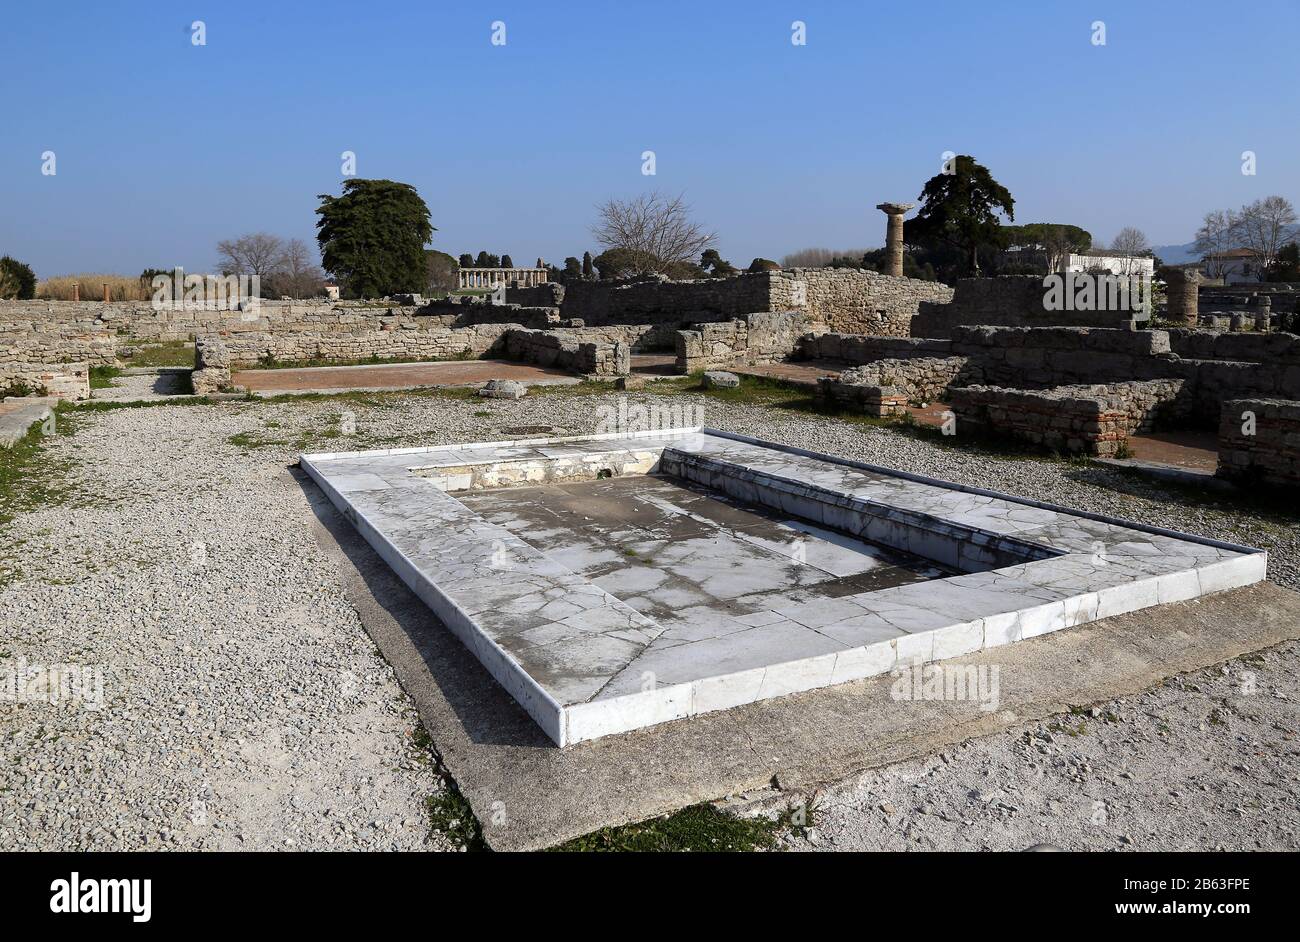 House with marble impluvium. Well preserved ruin in Paestum. Roman Period, 3rd Cent. BC. Archaeological site of Paestum. Campania, Italy. Stock Photo